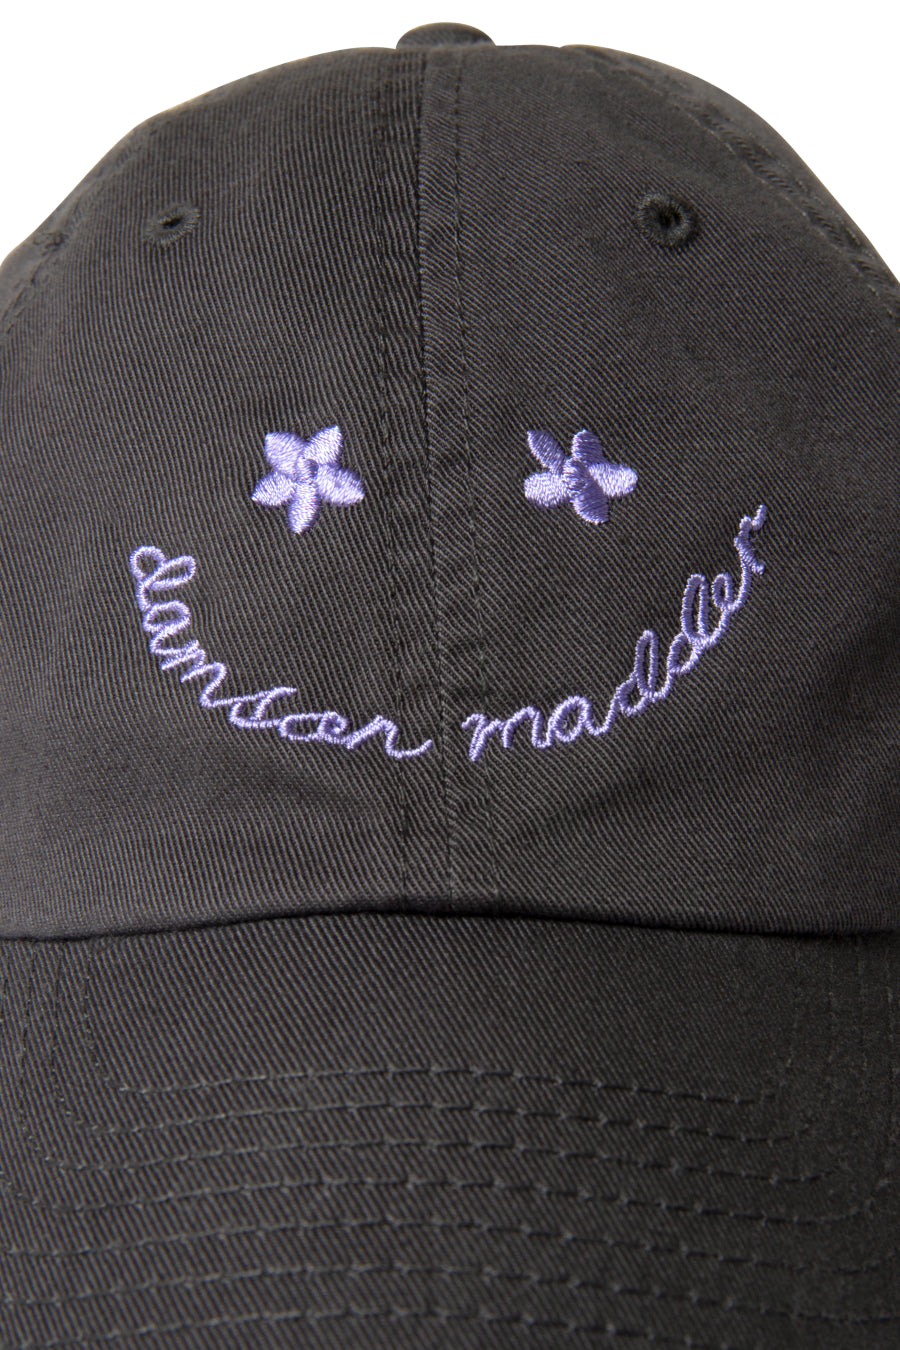 smiley cap with lilac embroidery - web exclusive